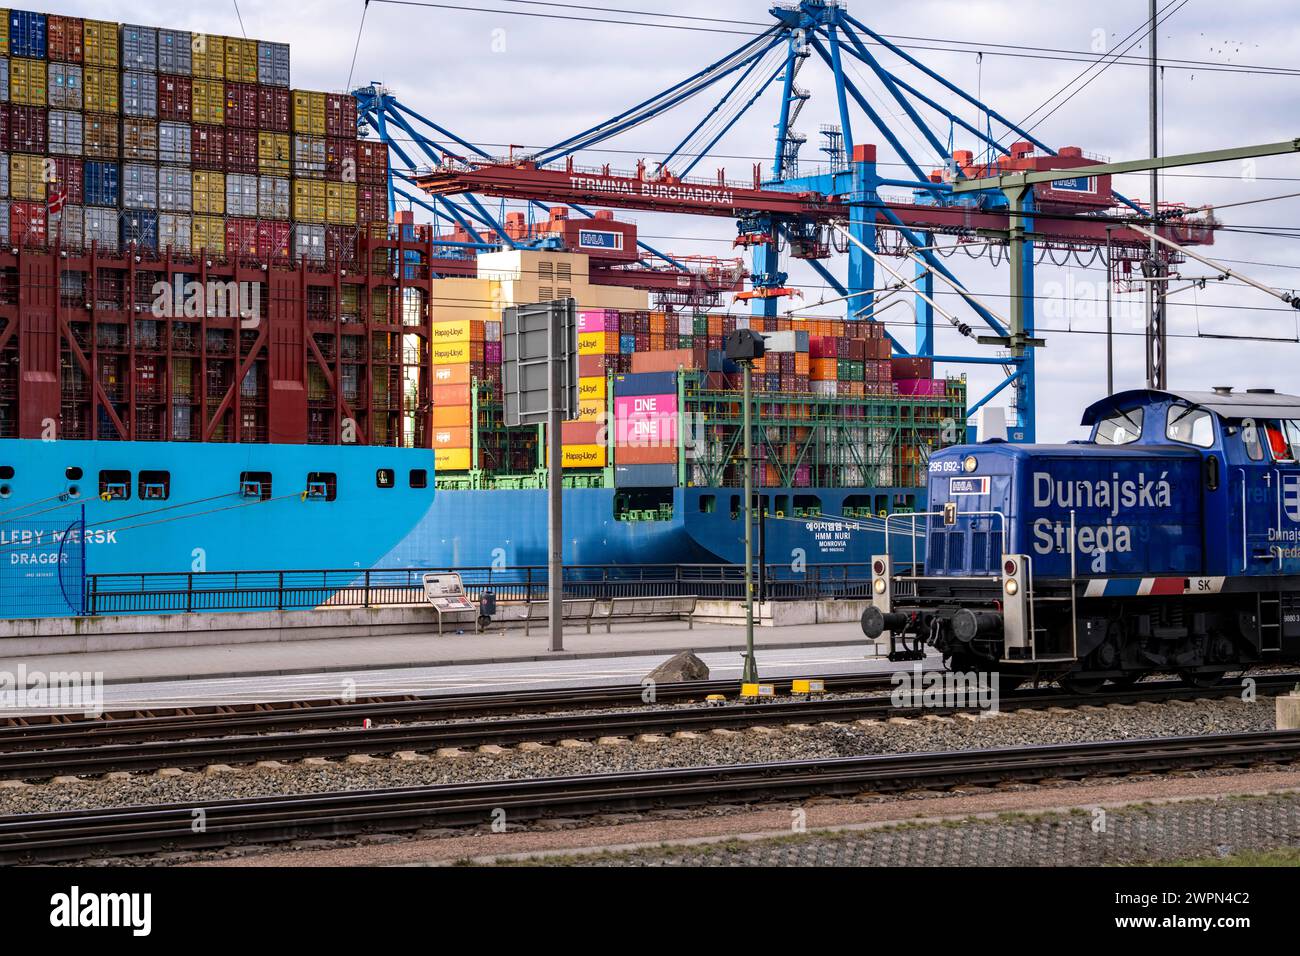 Port of Hamburg, Waltershofer Hafen, container ships, freight train brings and collects freight containers to and from HHLA Container Terminal Burchar Stock Photo